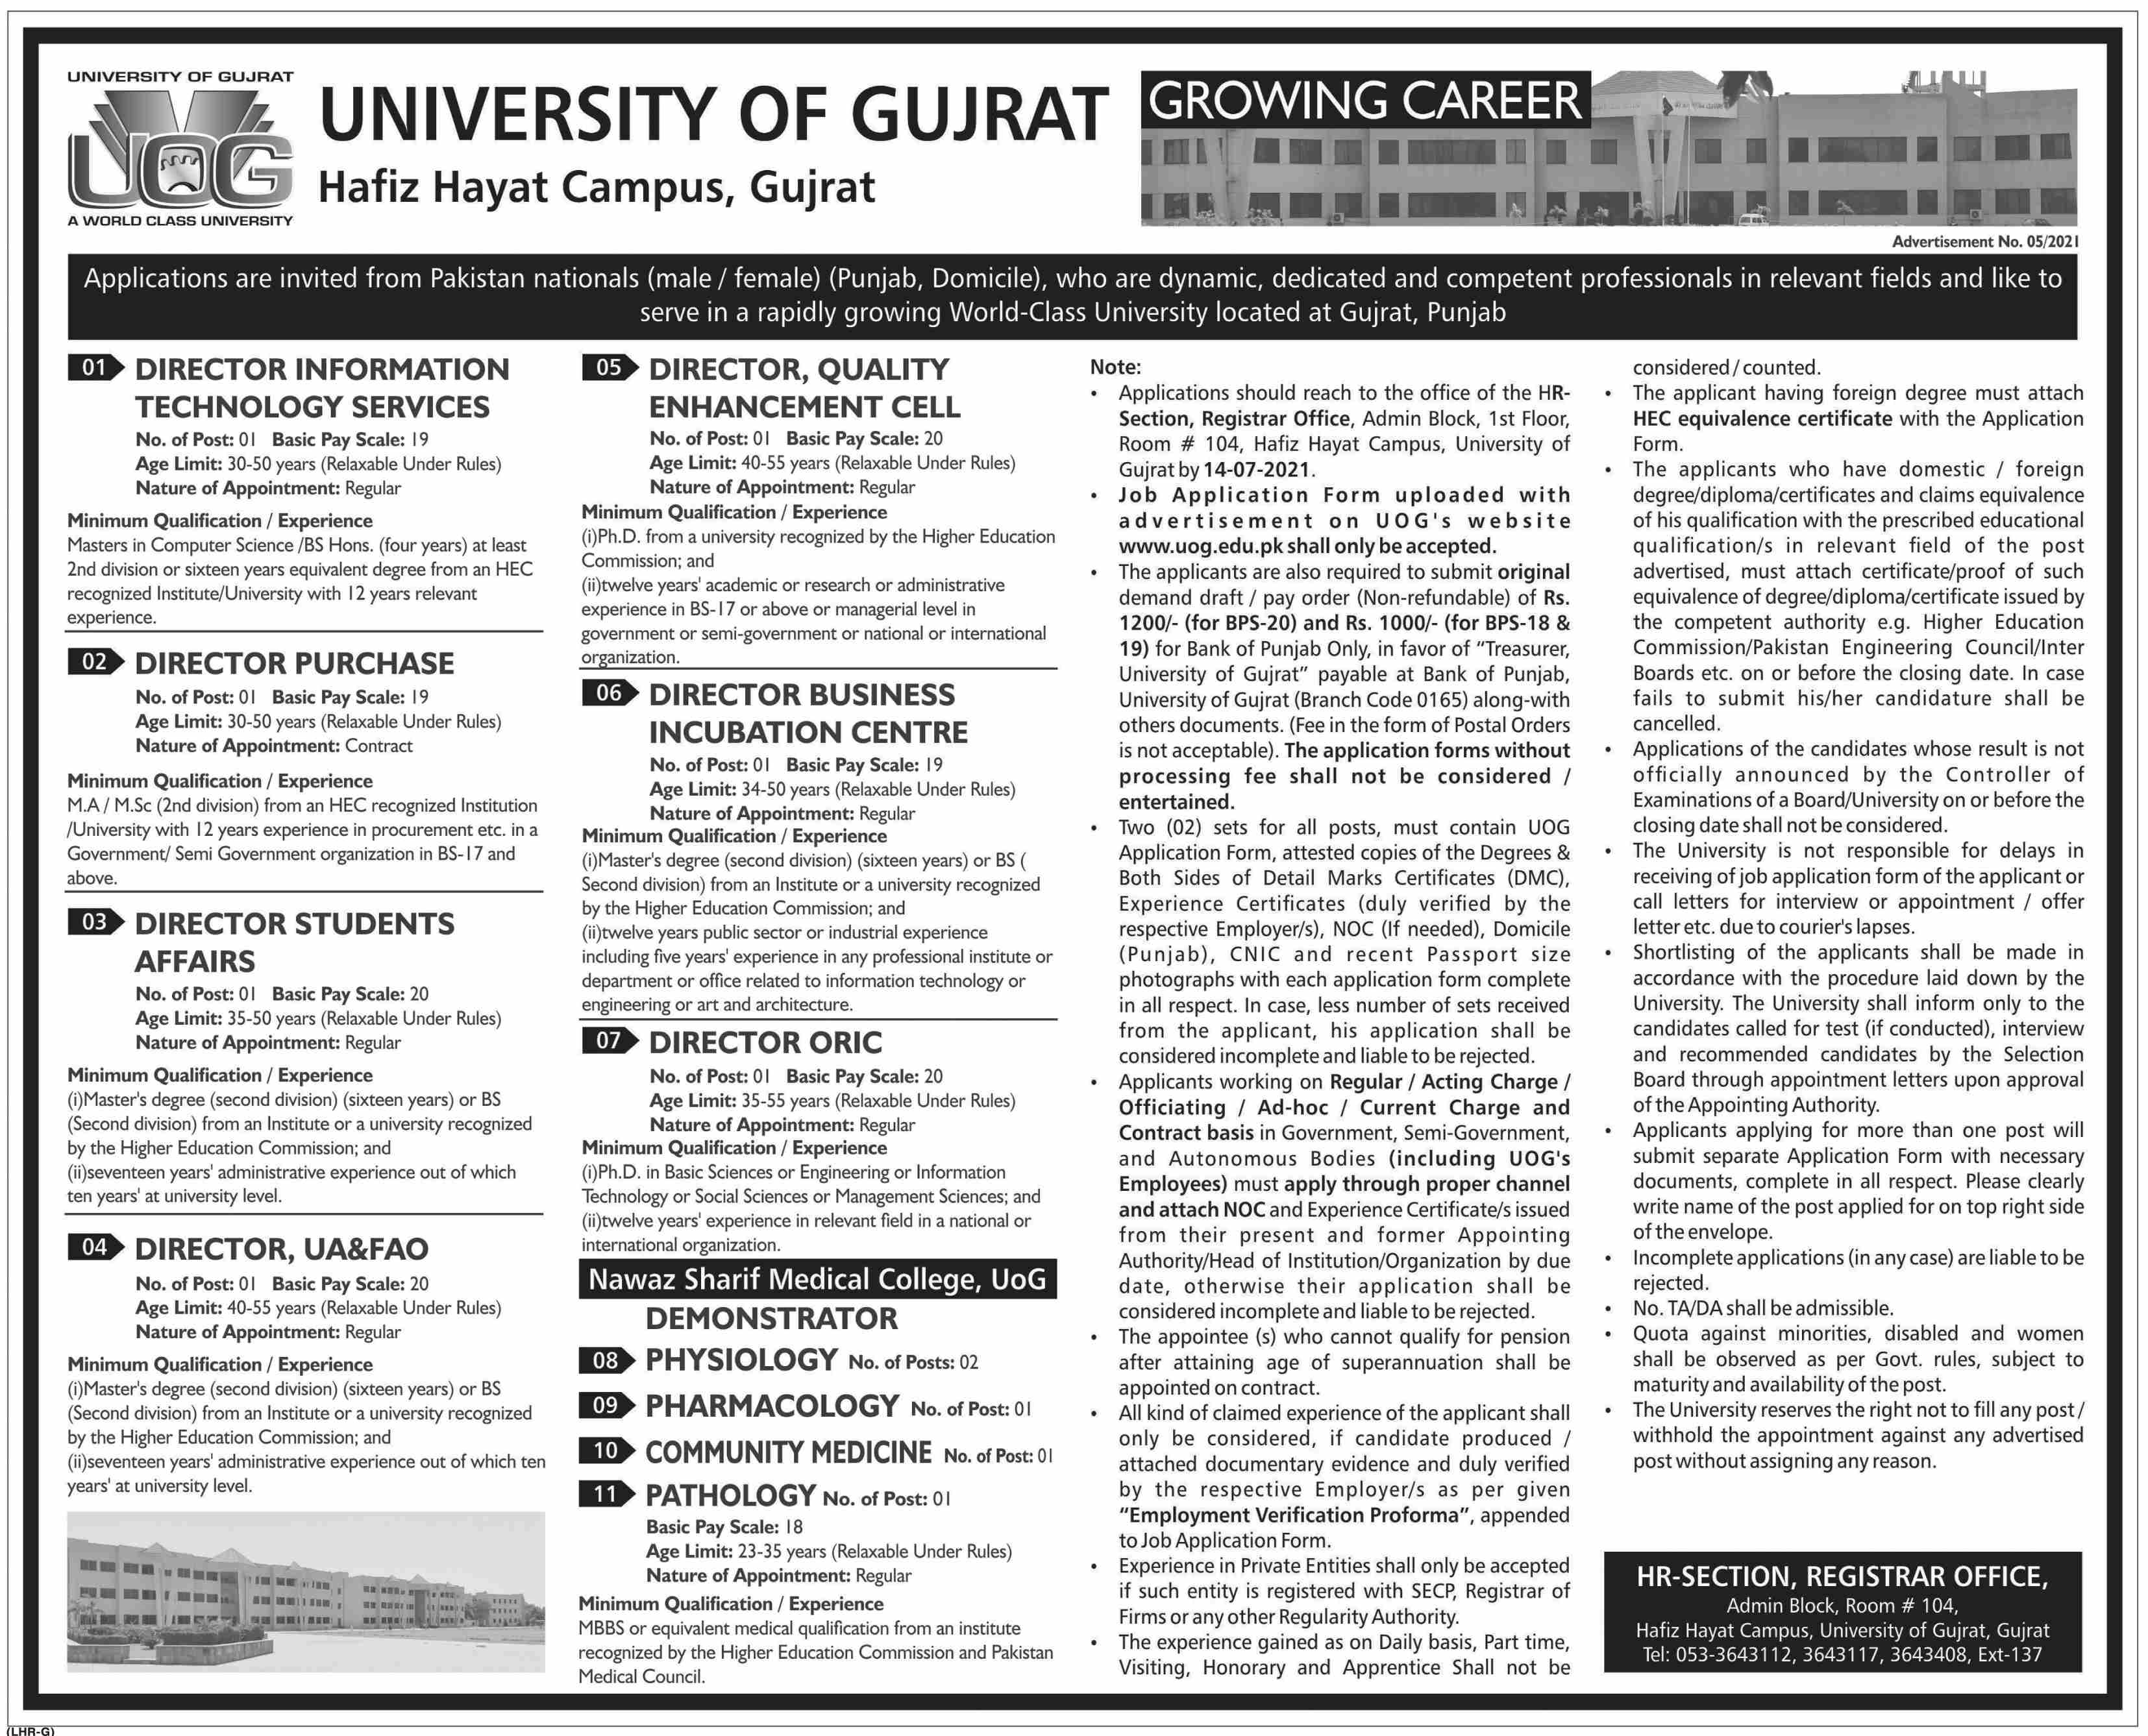 Director Student Affairs Jobs in University of Gujrat, 2021 